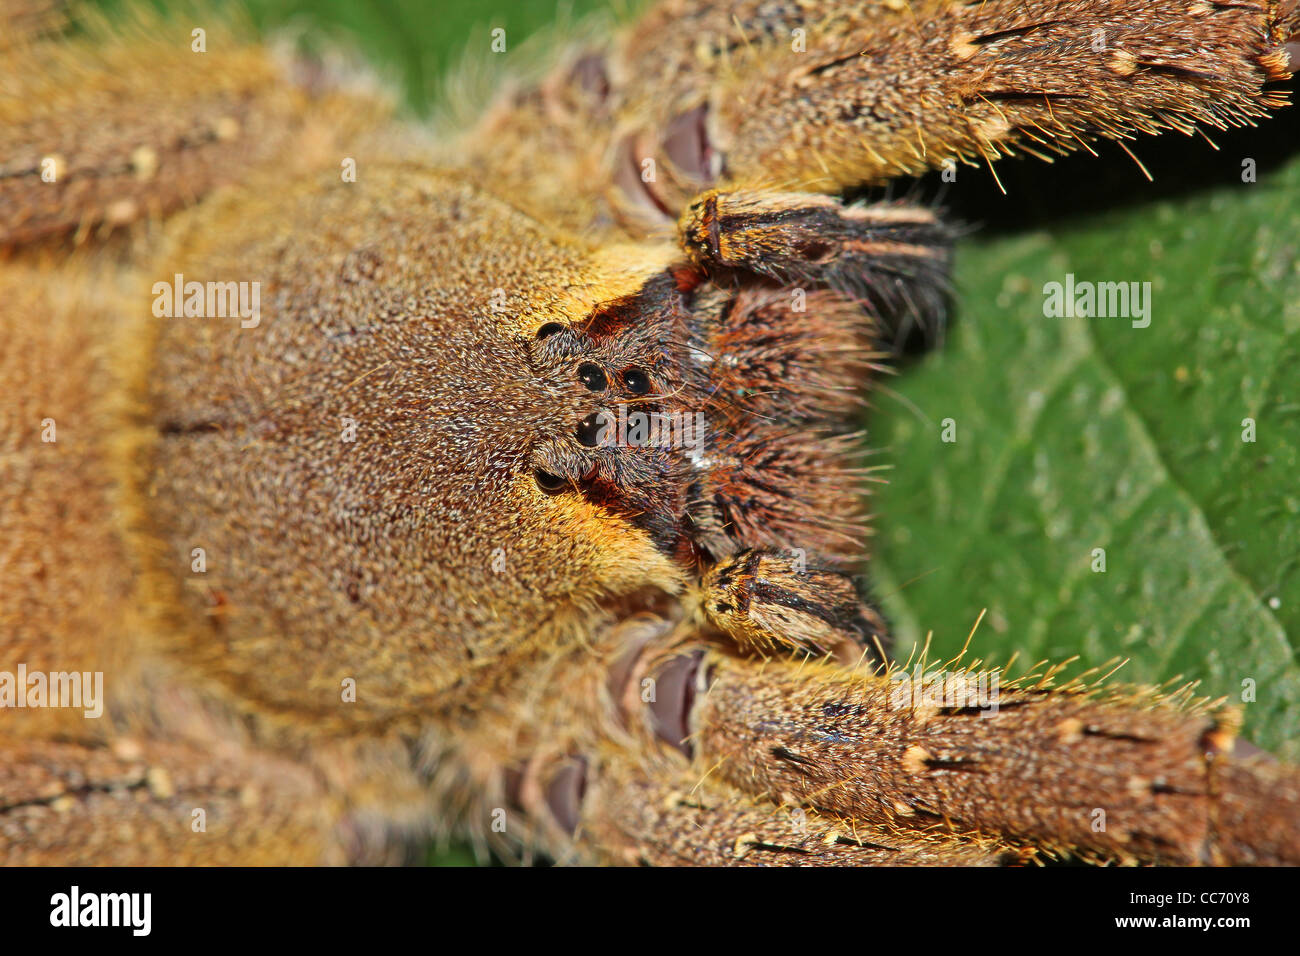 A LARGE, HAIRY, YELLOW spider in the Peruvian Amazon TERRIFYING closeups of some creepy crawlies Stock Photo